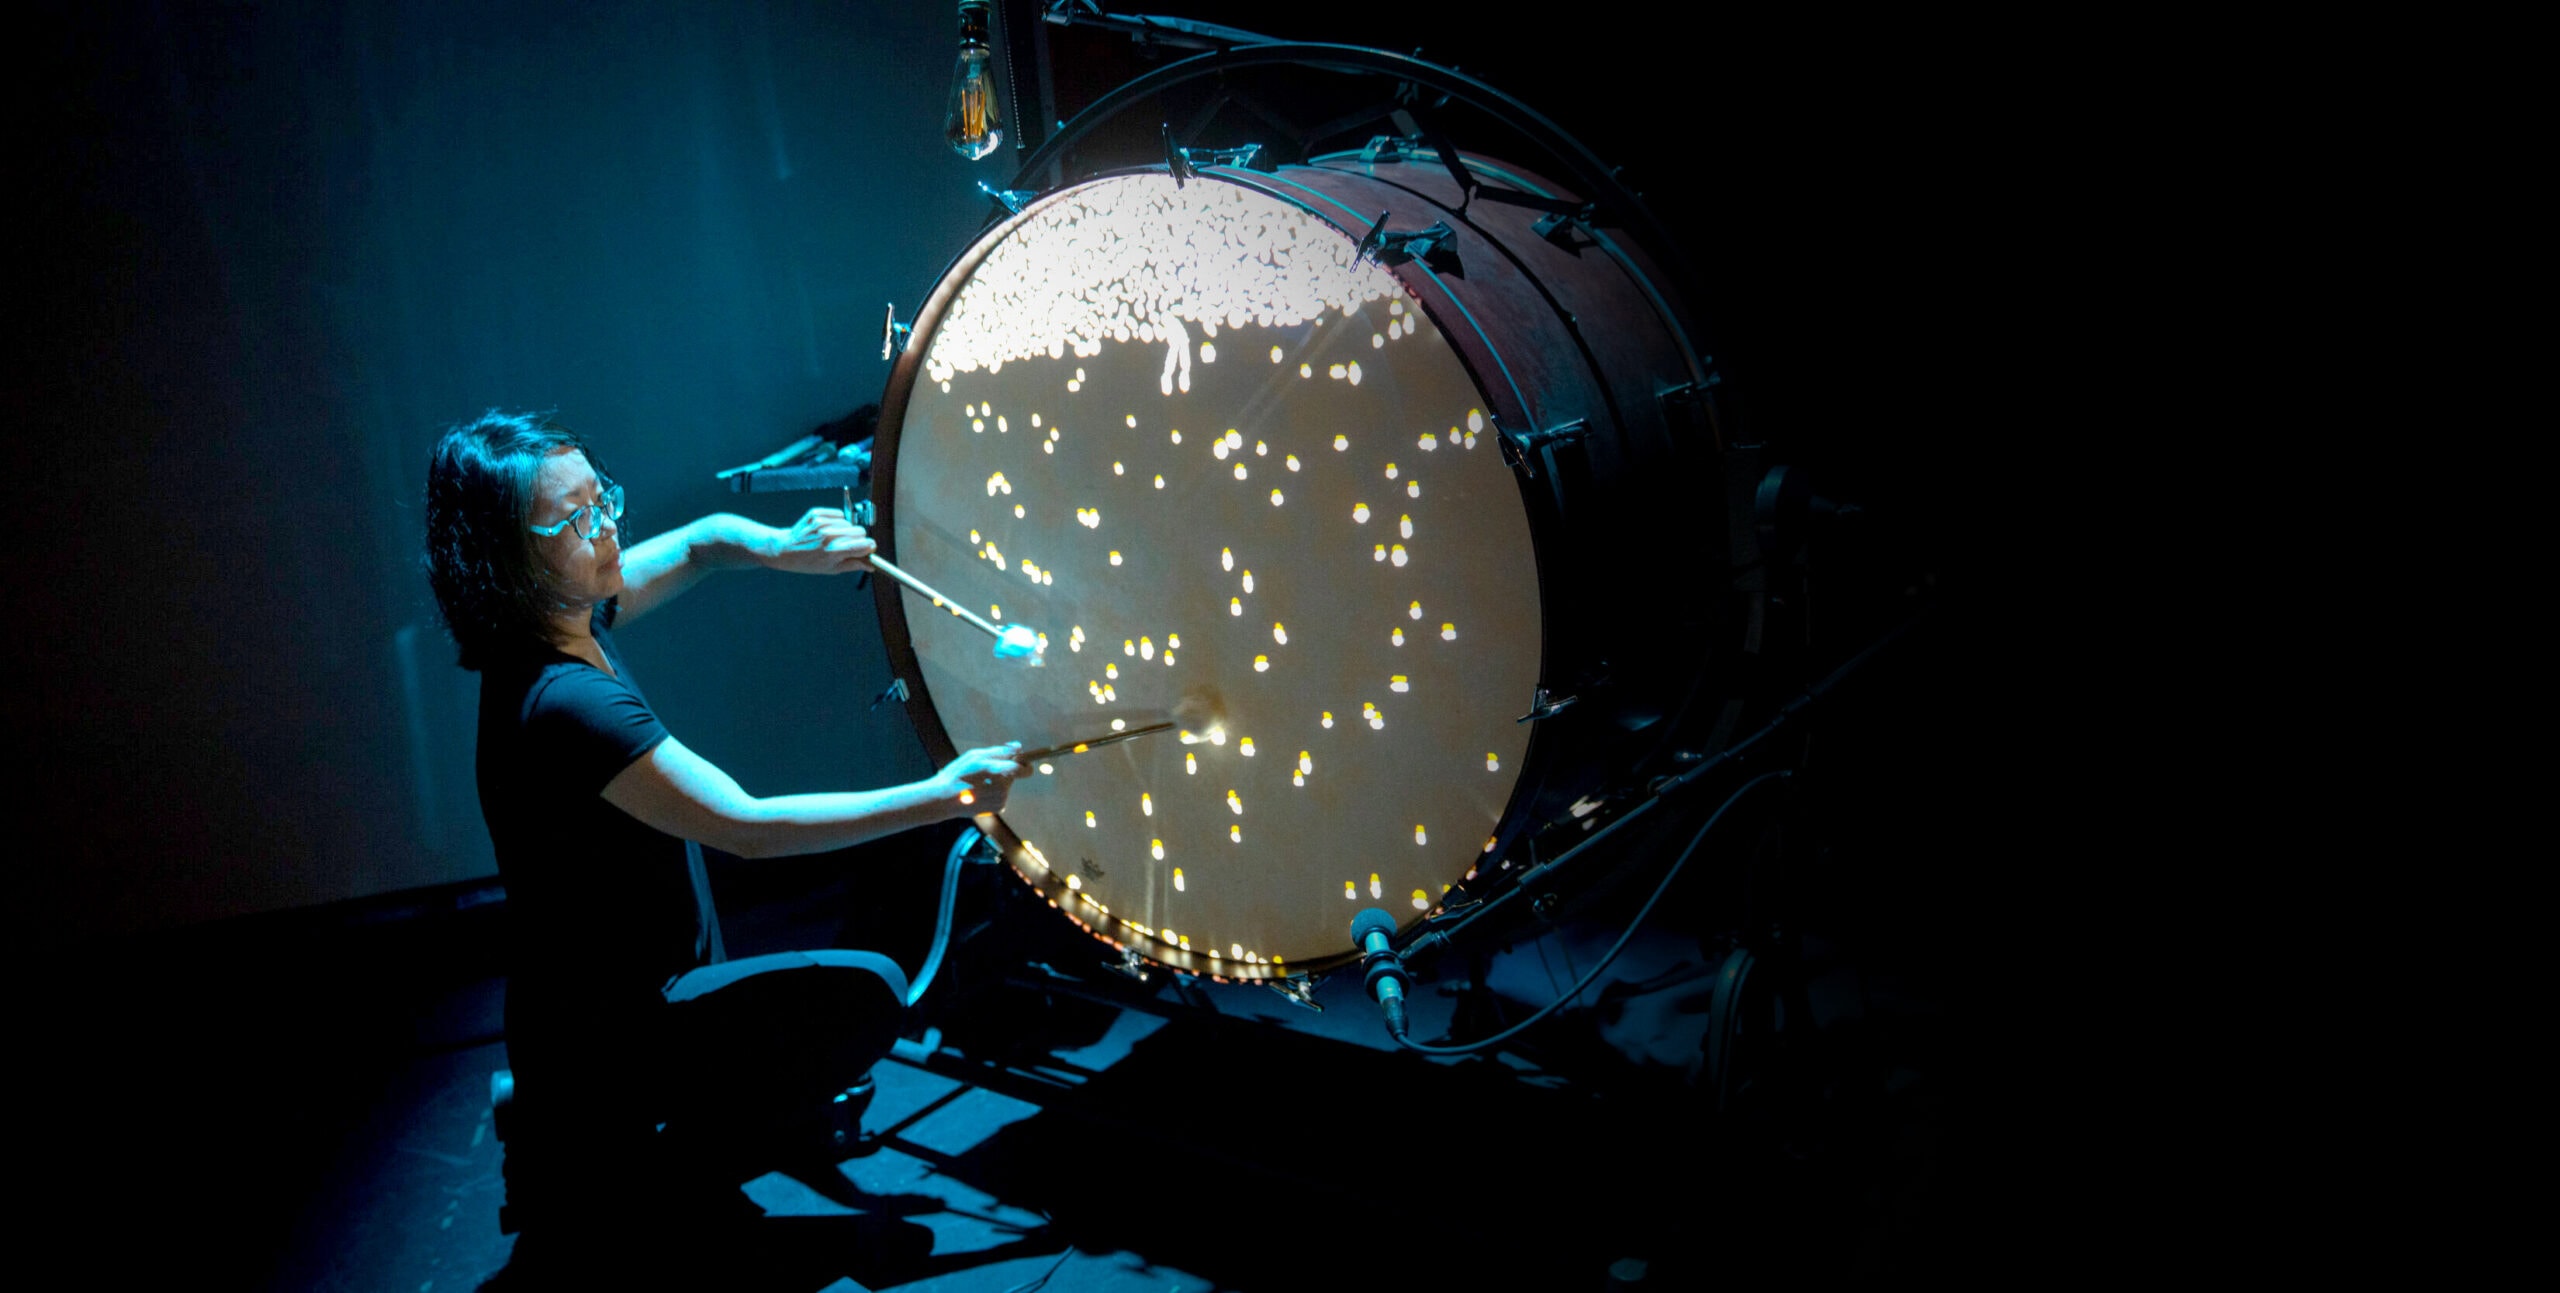 A woman kneels and strikes a metre-high drum. Blobs of light are scattered over the drum surface and cluster at the top.